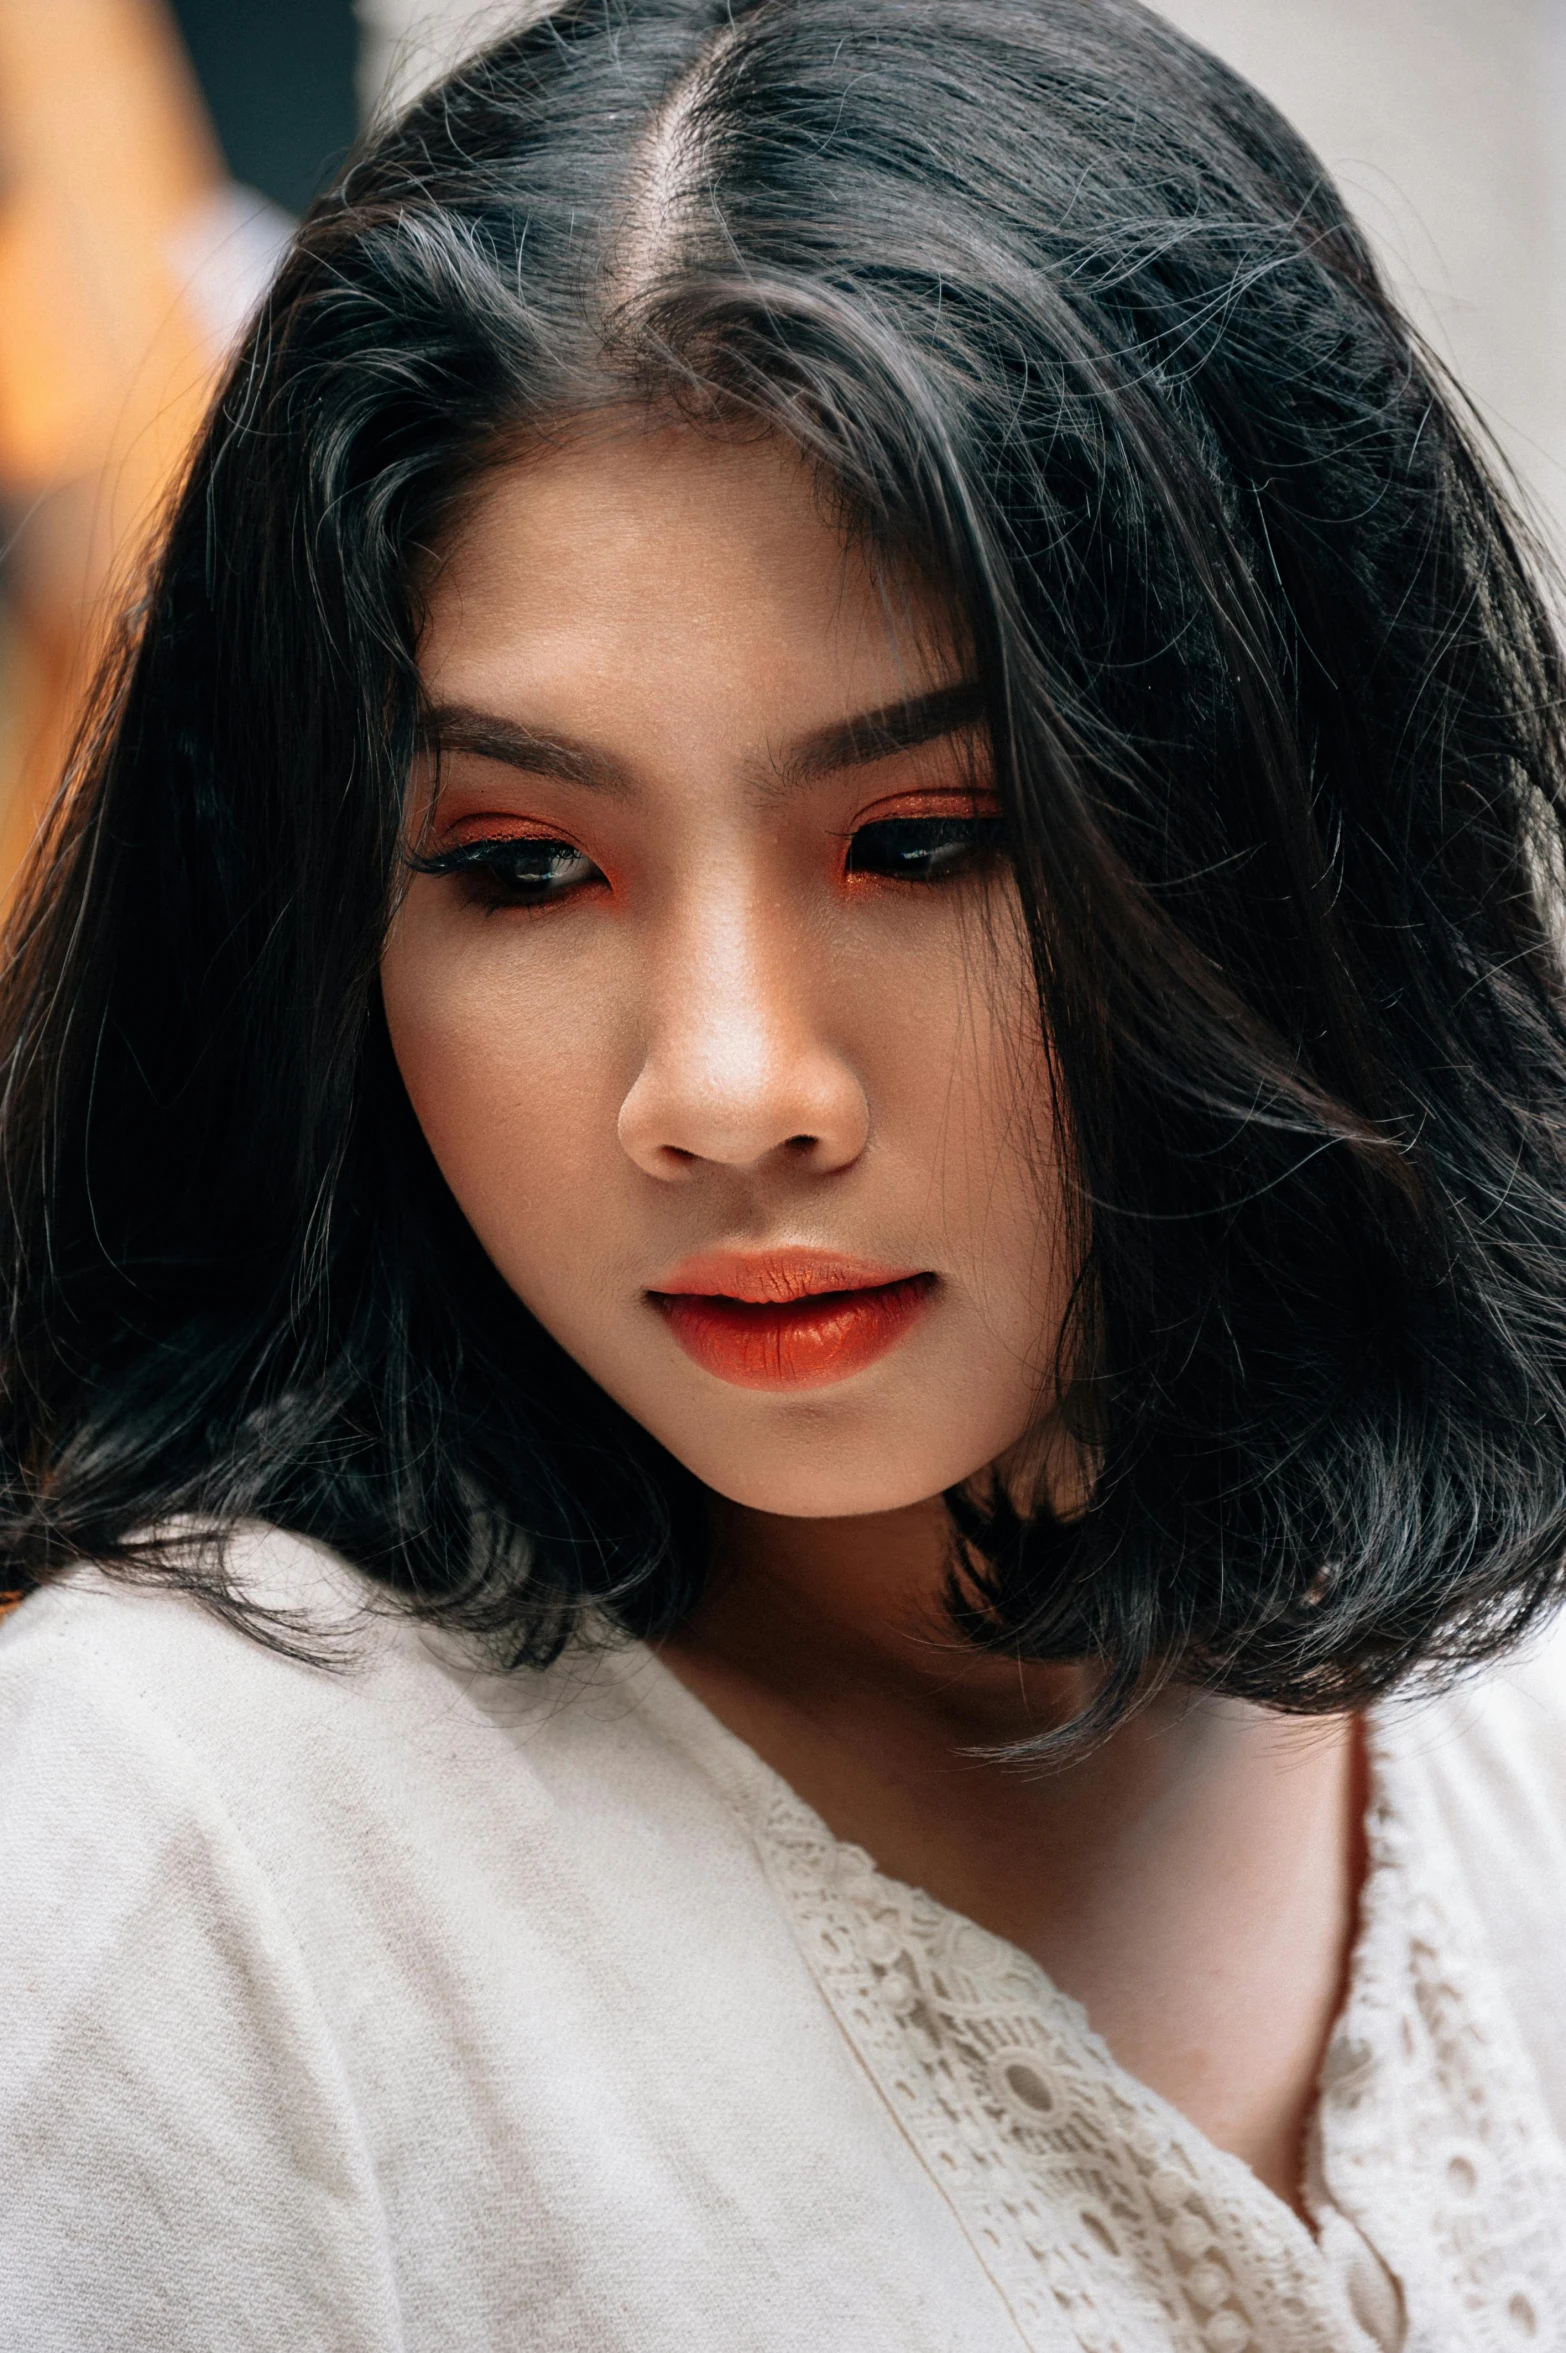 a woman with long black hair wearing a white shirt, trending on pexels, coral lipstick, malaysian, portrait mode photo, black and orange